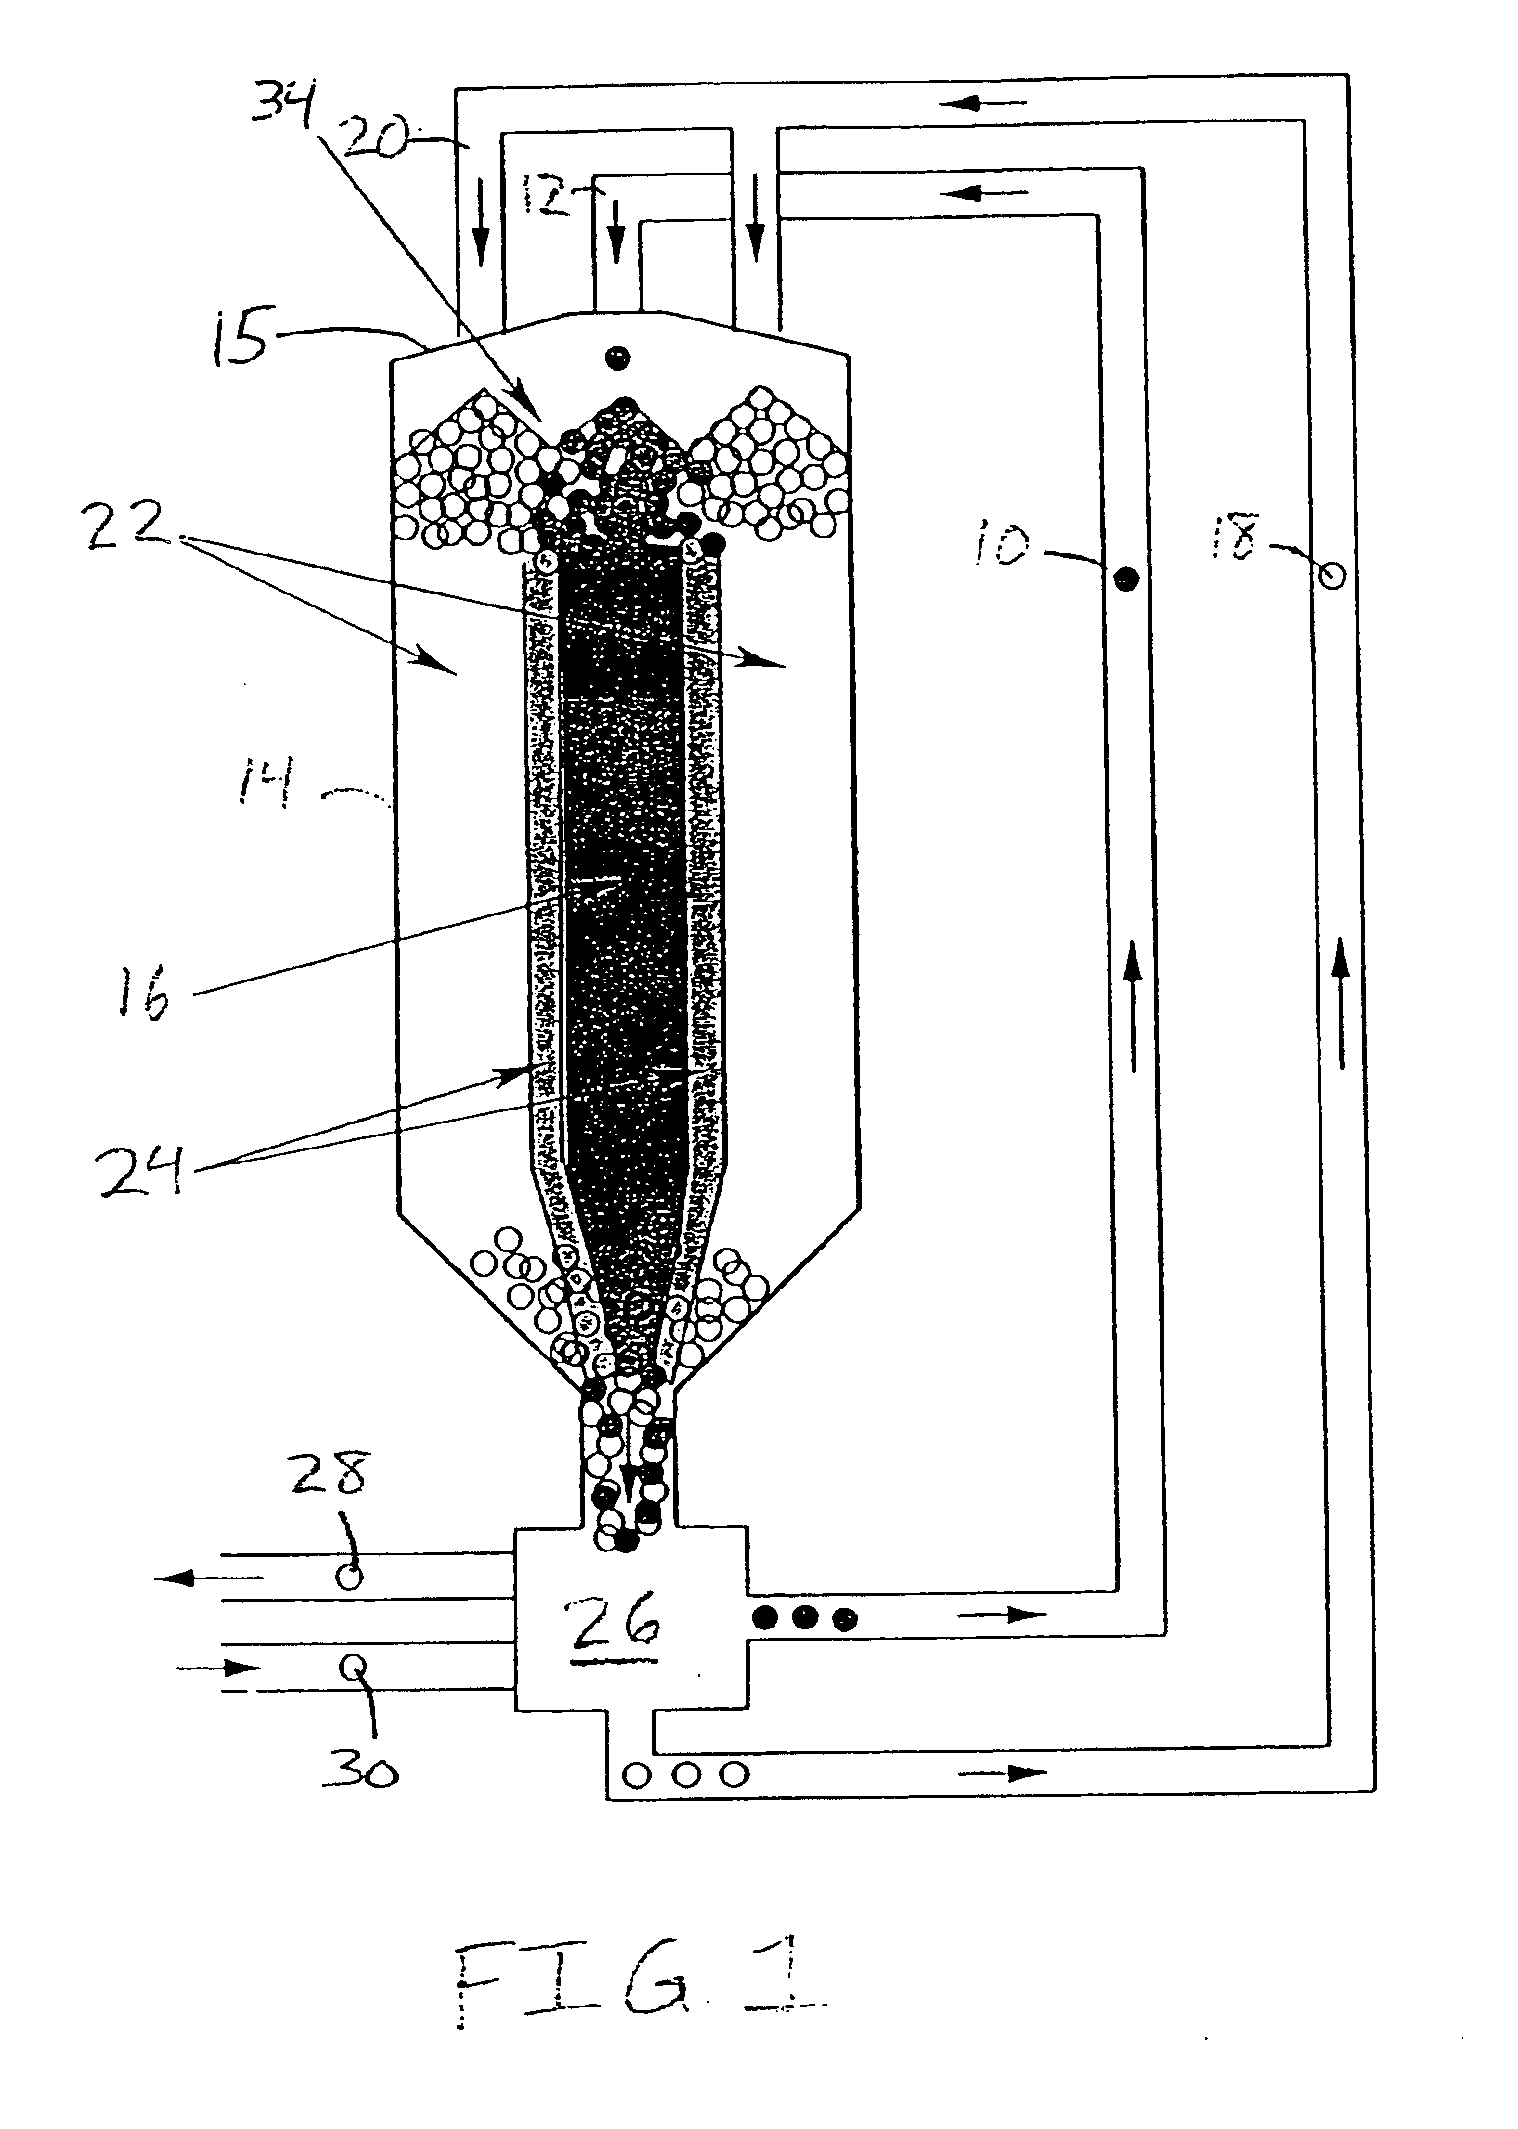 Guide ring to control granular mixing in a pebble-bed nuclear reactor